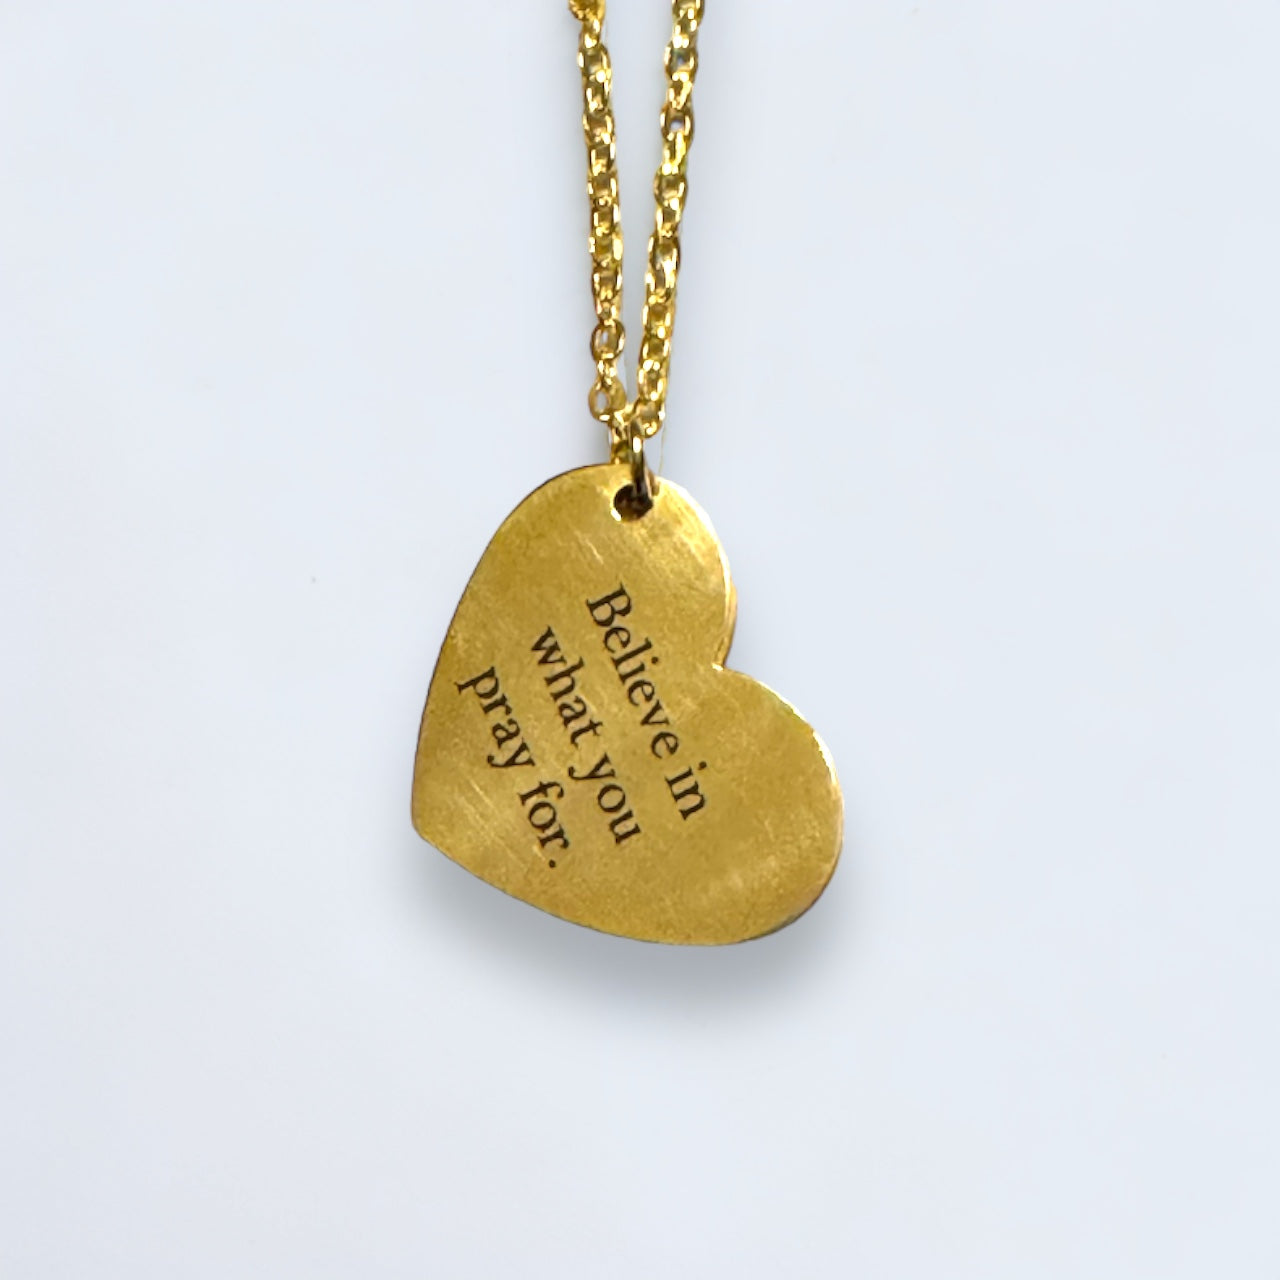 Believe In What You Pray For Heart Charm Necklace